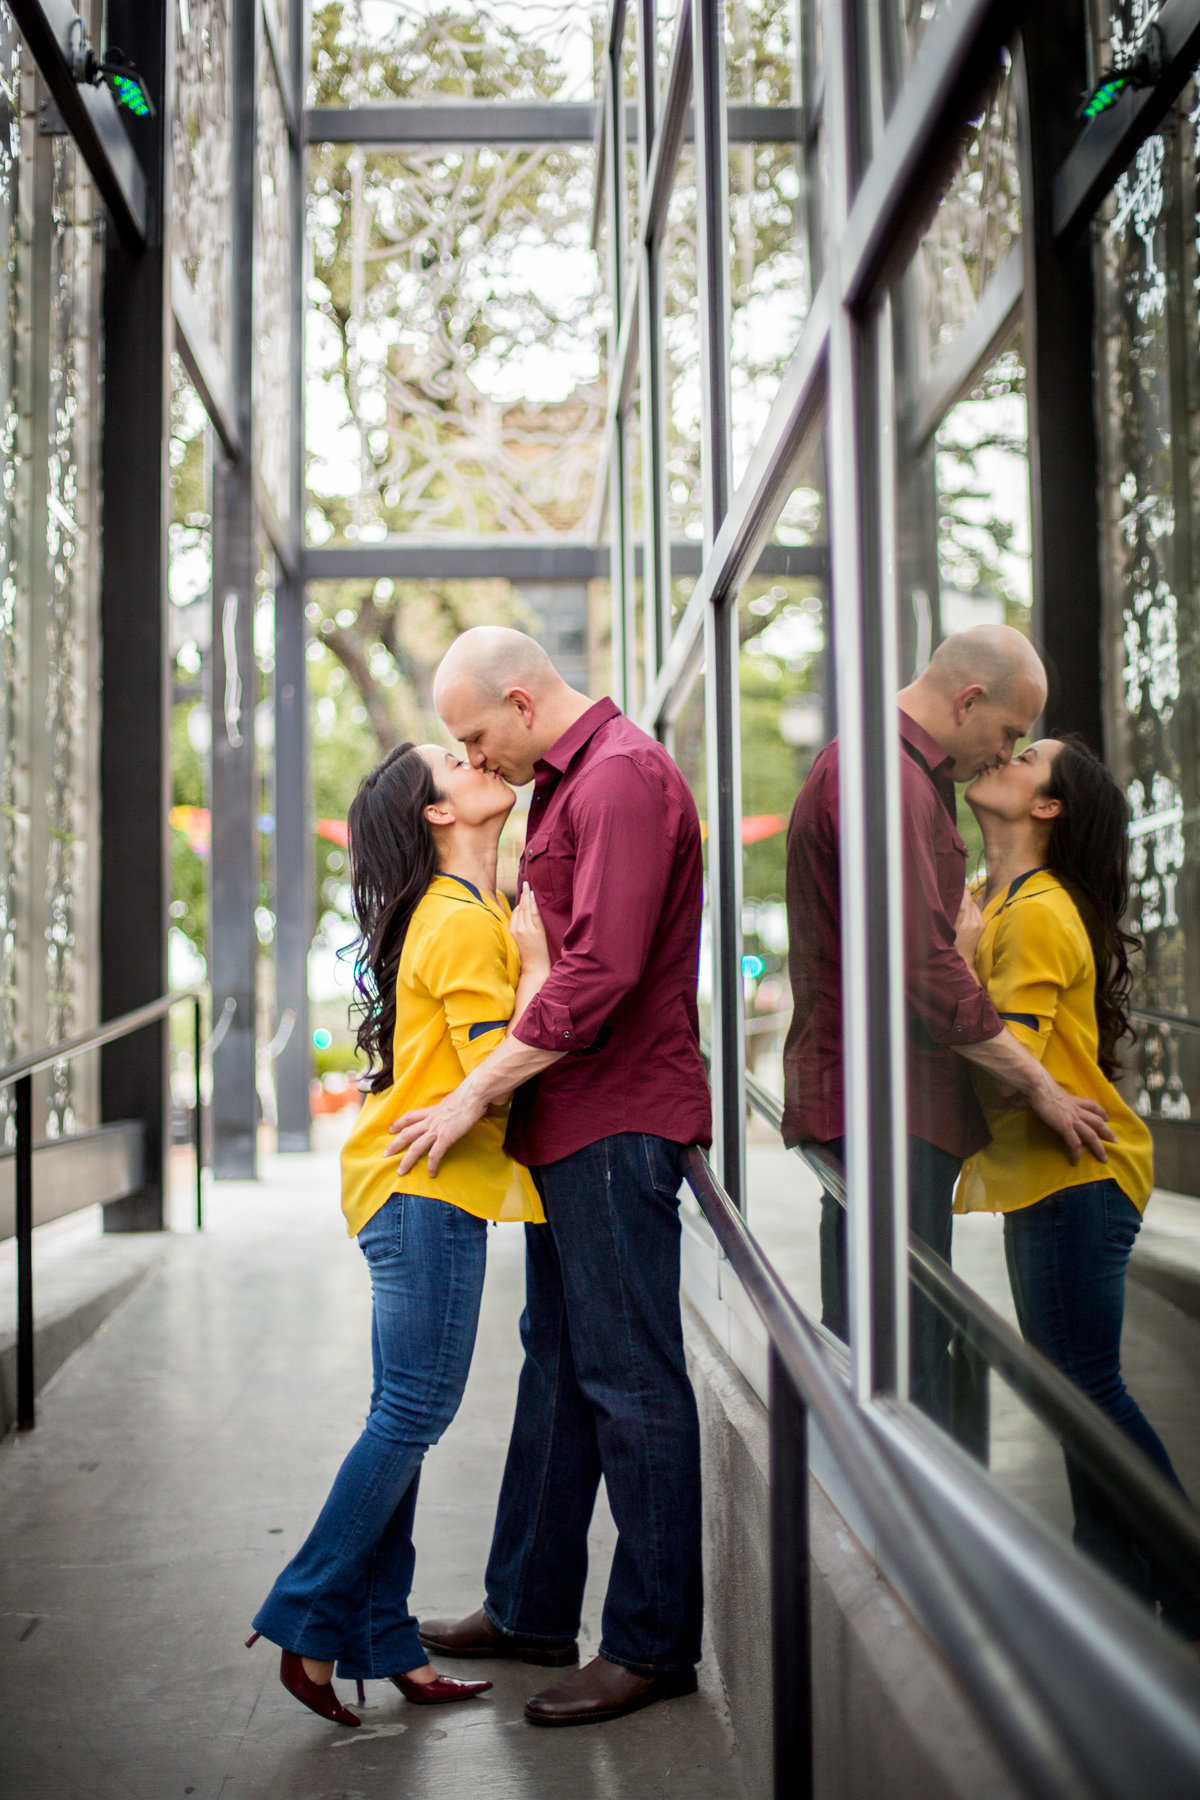 Engaged couple embracing and kissing and you can see their reflection on the building next to them.